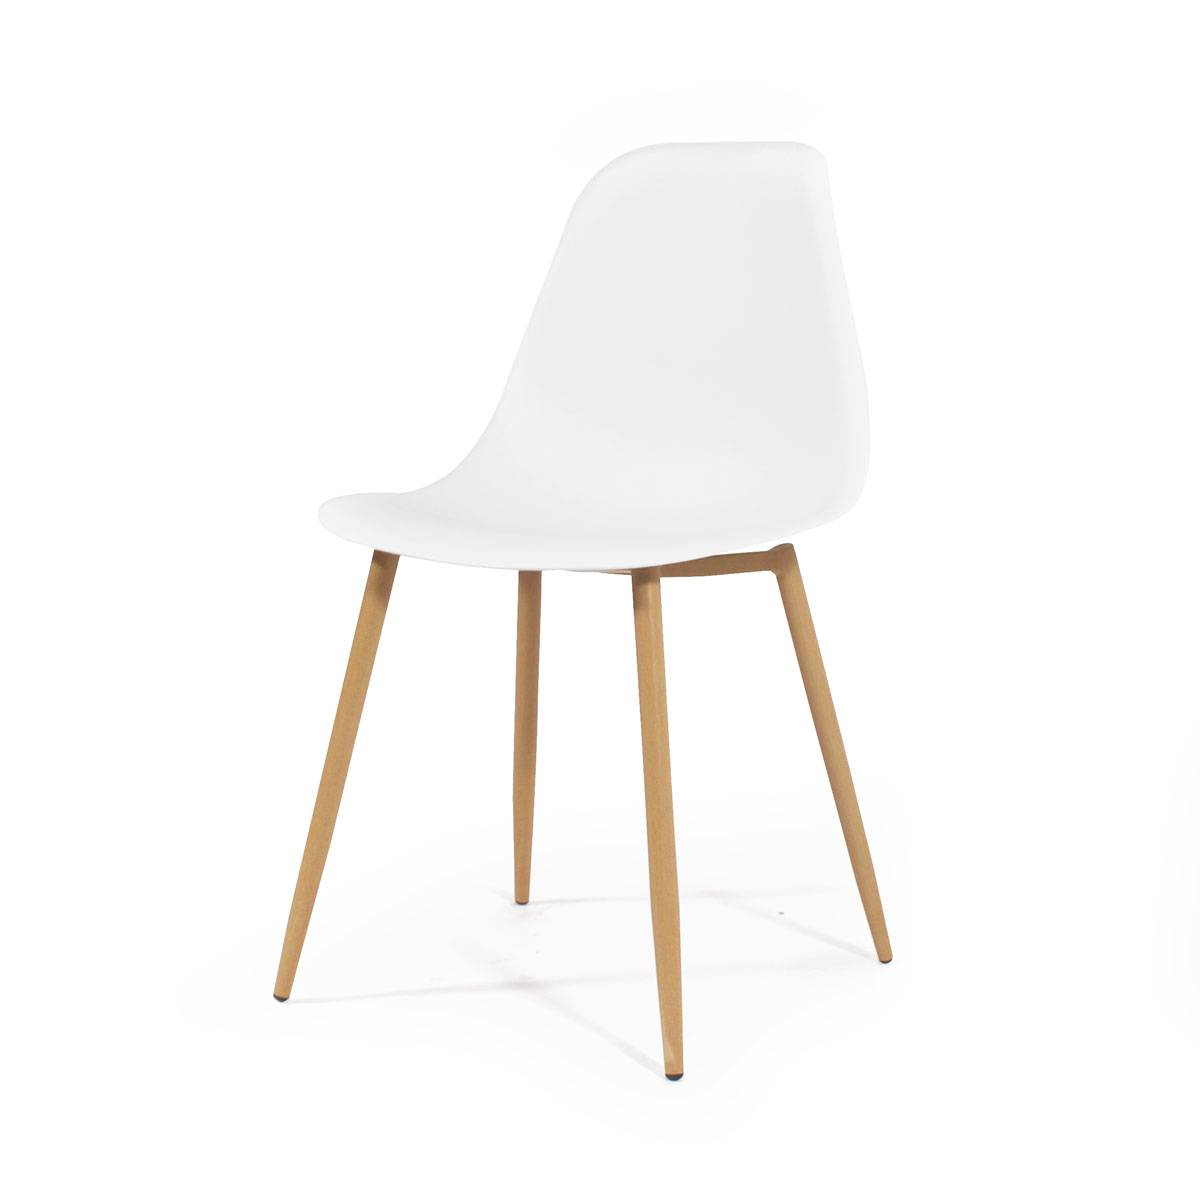 Chaise scandinave blanche simple